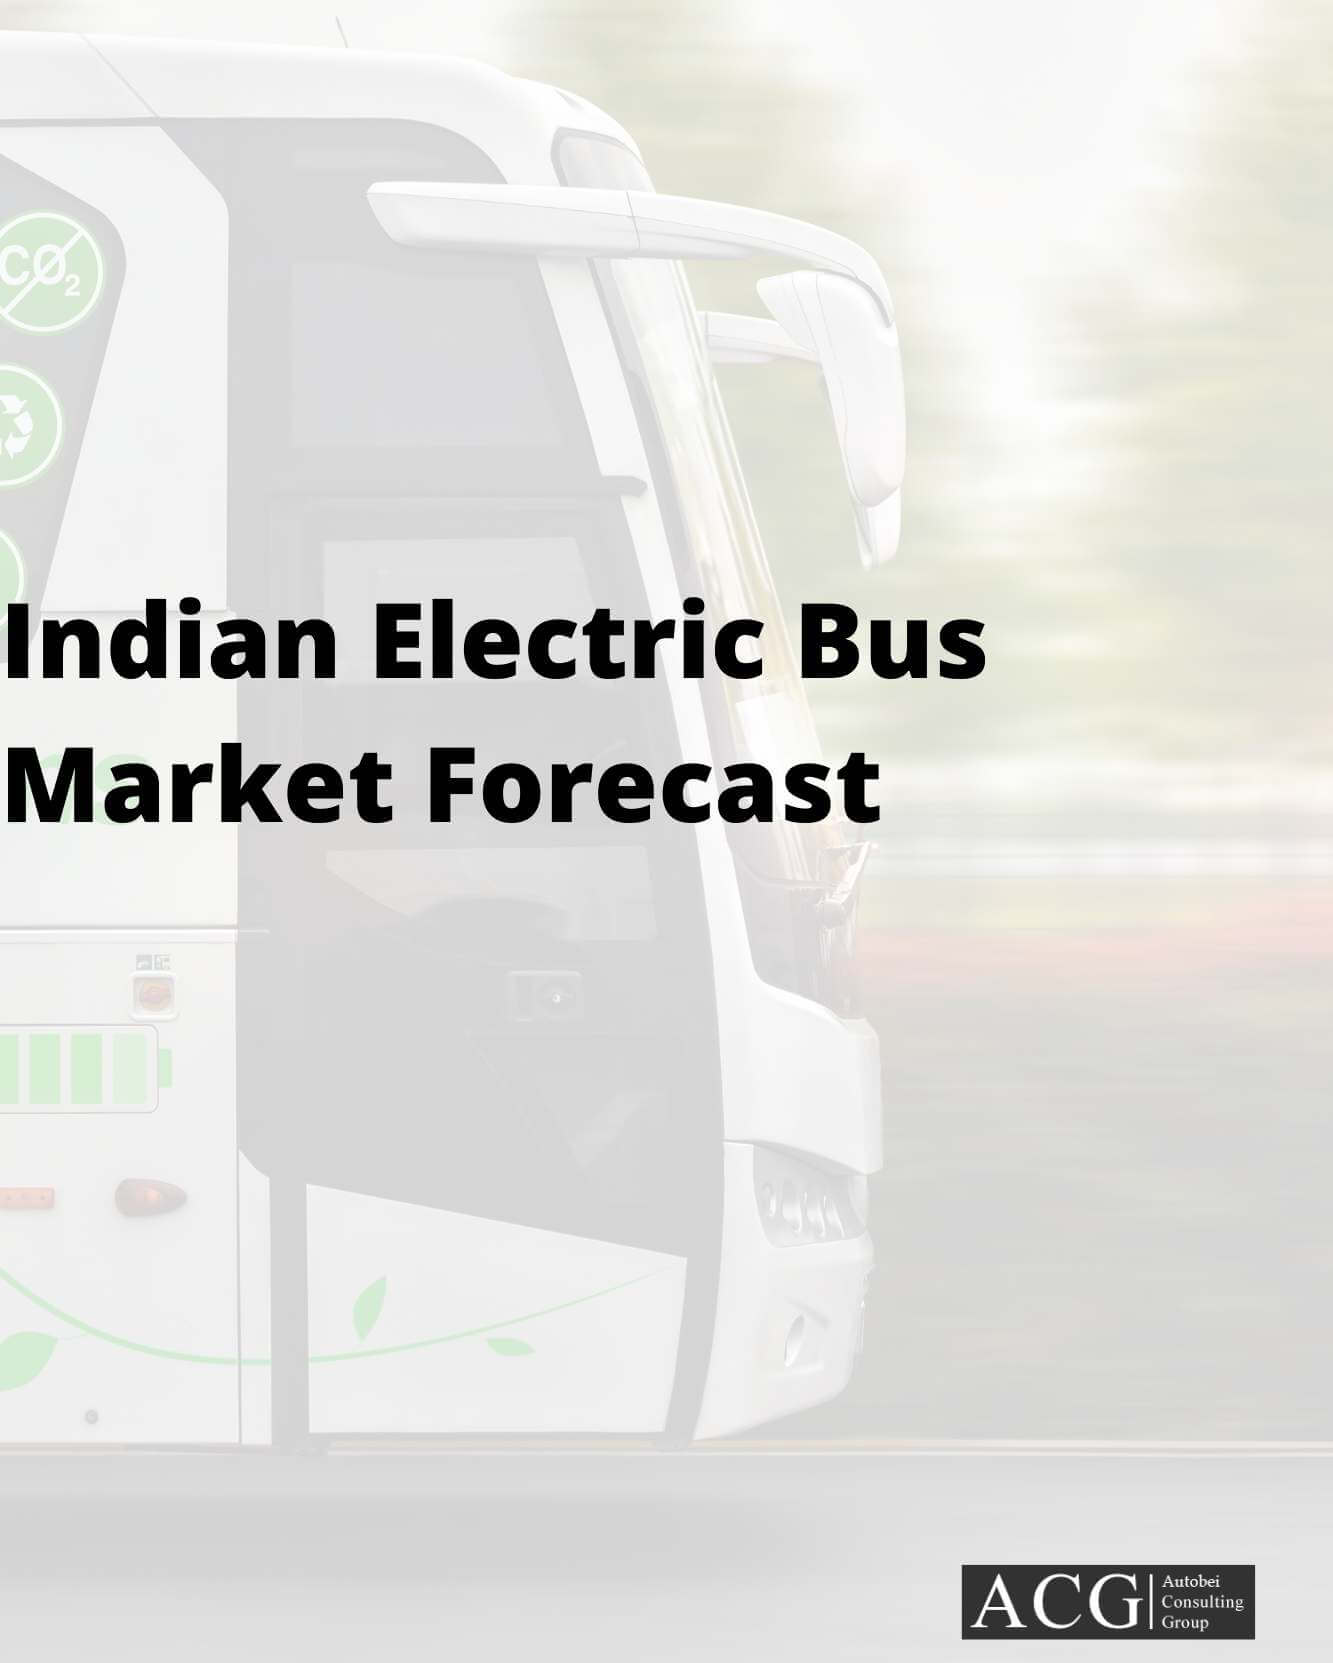 Indian Electric Bus Product and Market Forecast